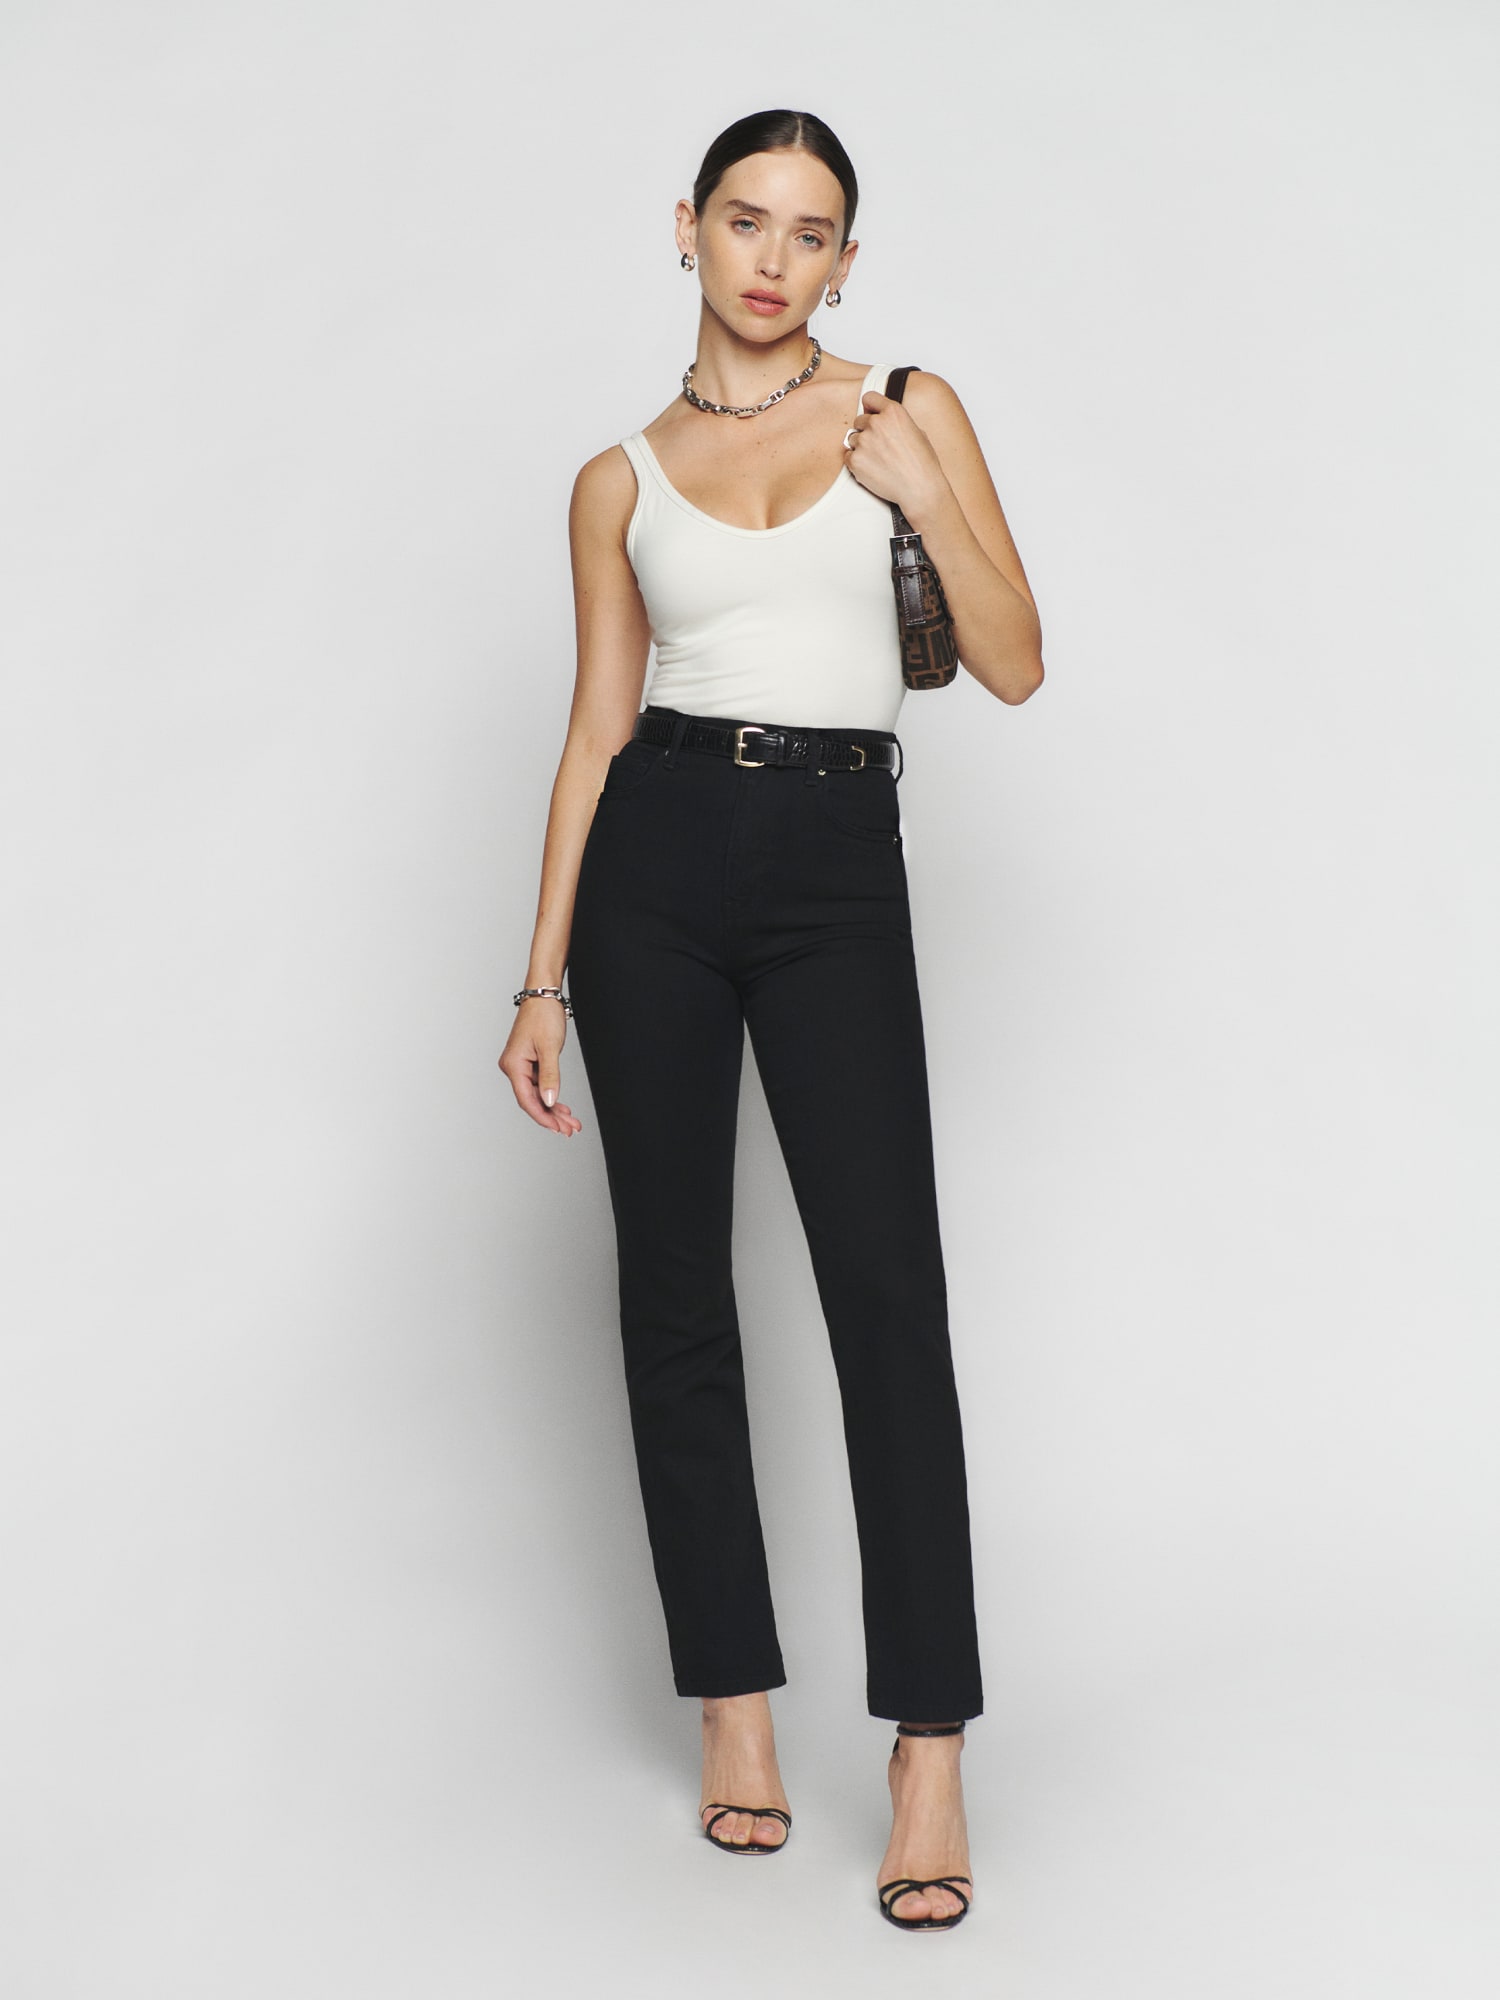 Optage Rute arm Liza Ultra High Rise Straight Jeans - Sustainable Denim | Reformation